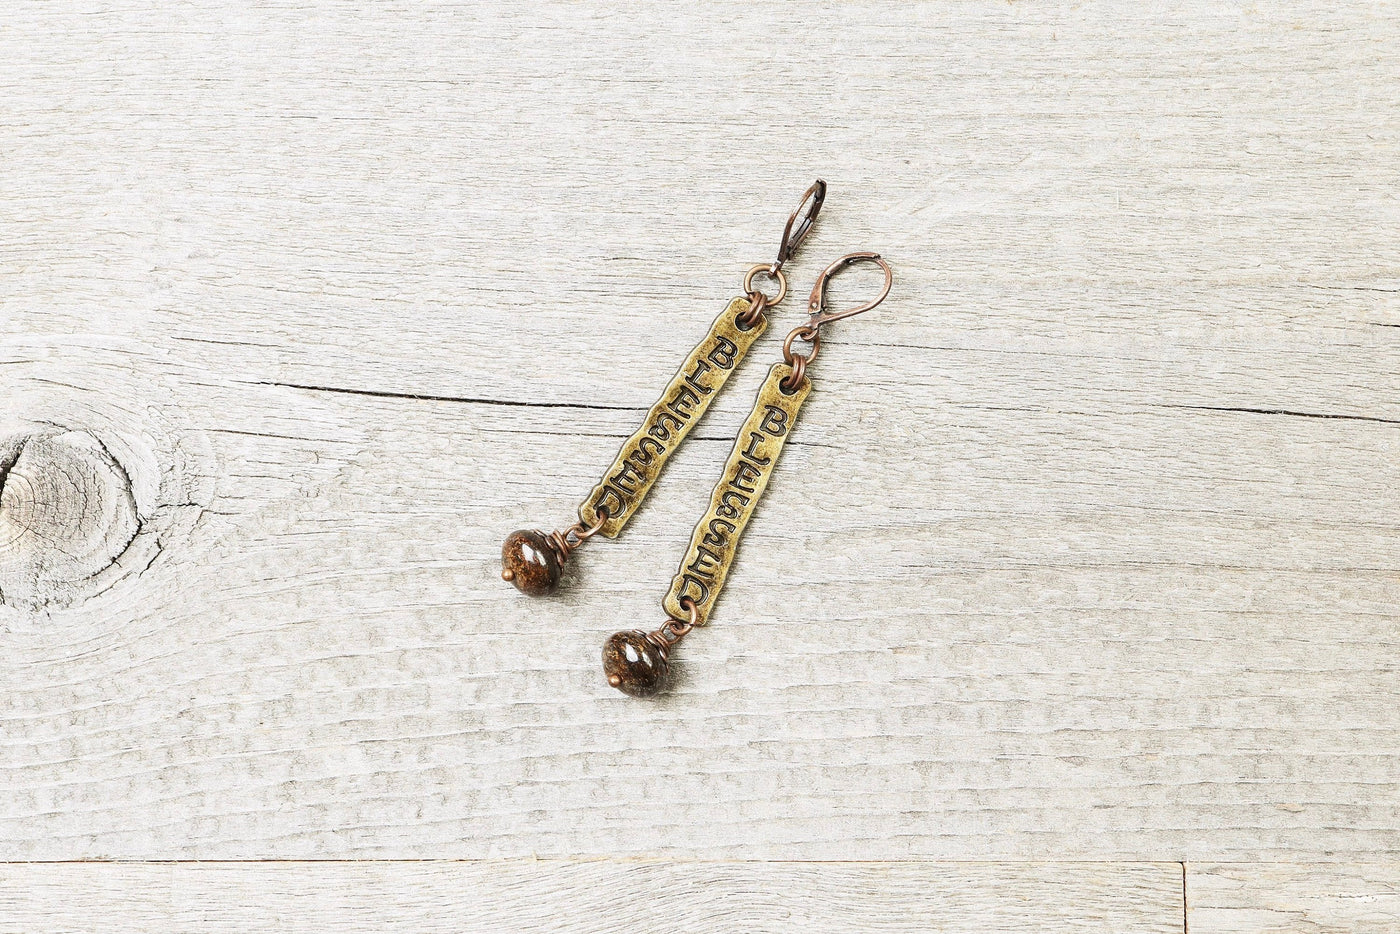 Blessed Bronzite Christian Earrings - Believer Baptism Gift Cute Lovely Elegant Brown Stone Religious Message Boho Gypsy Bohemian Jewelry